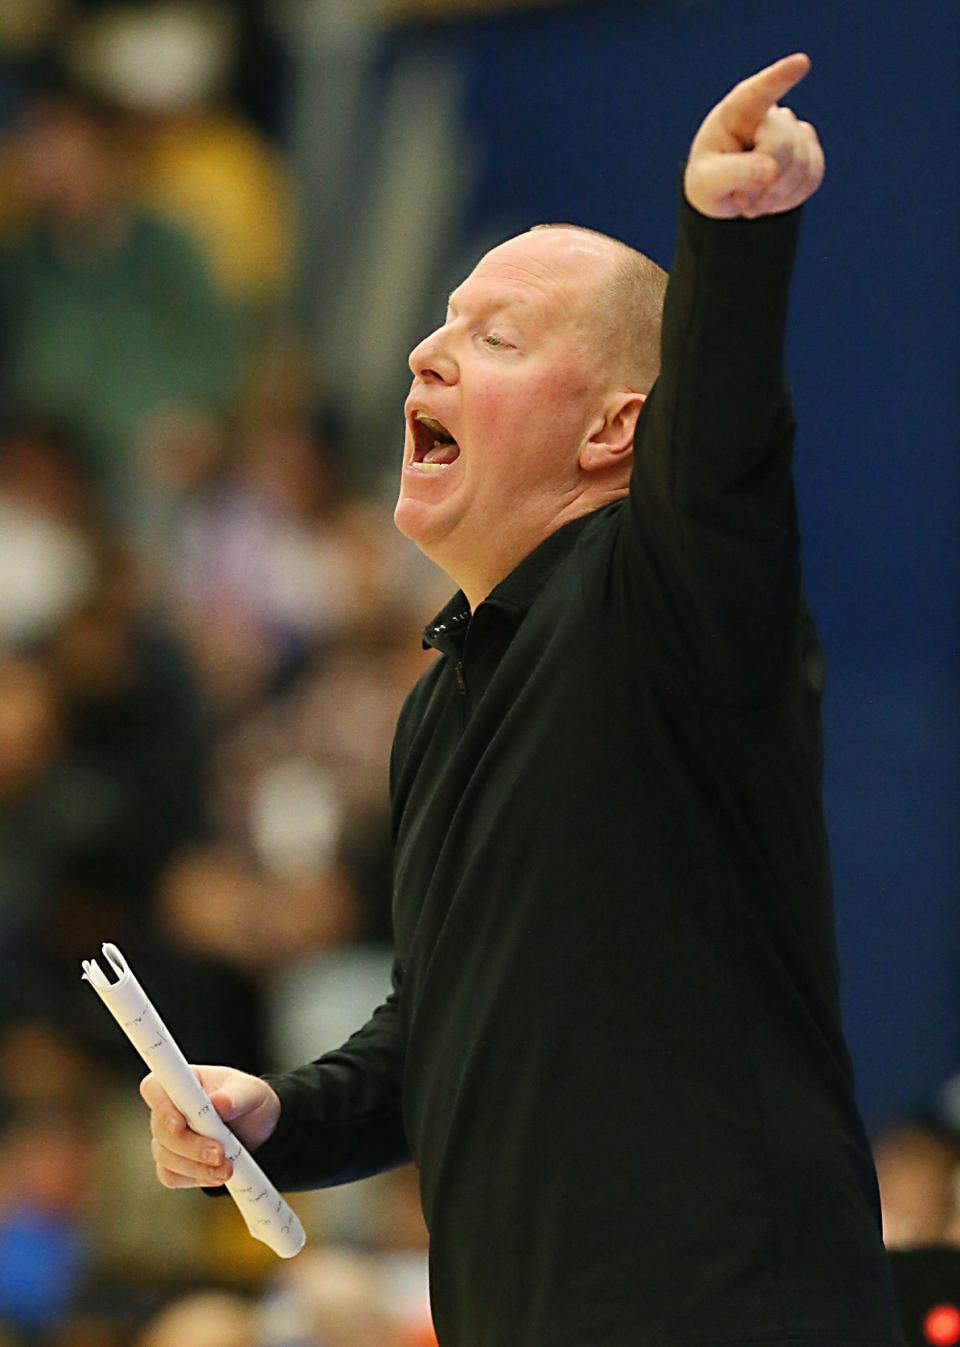 Kent State coach Rob Senderoff directs his team Friday night against Akron at the M.A.C. Center in Kent.